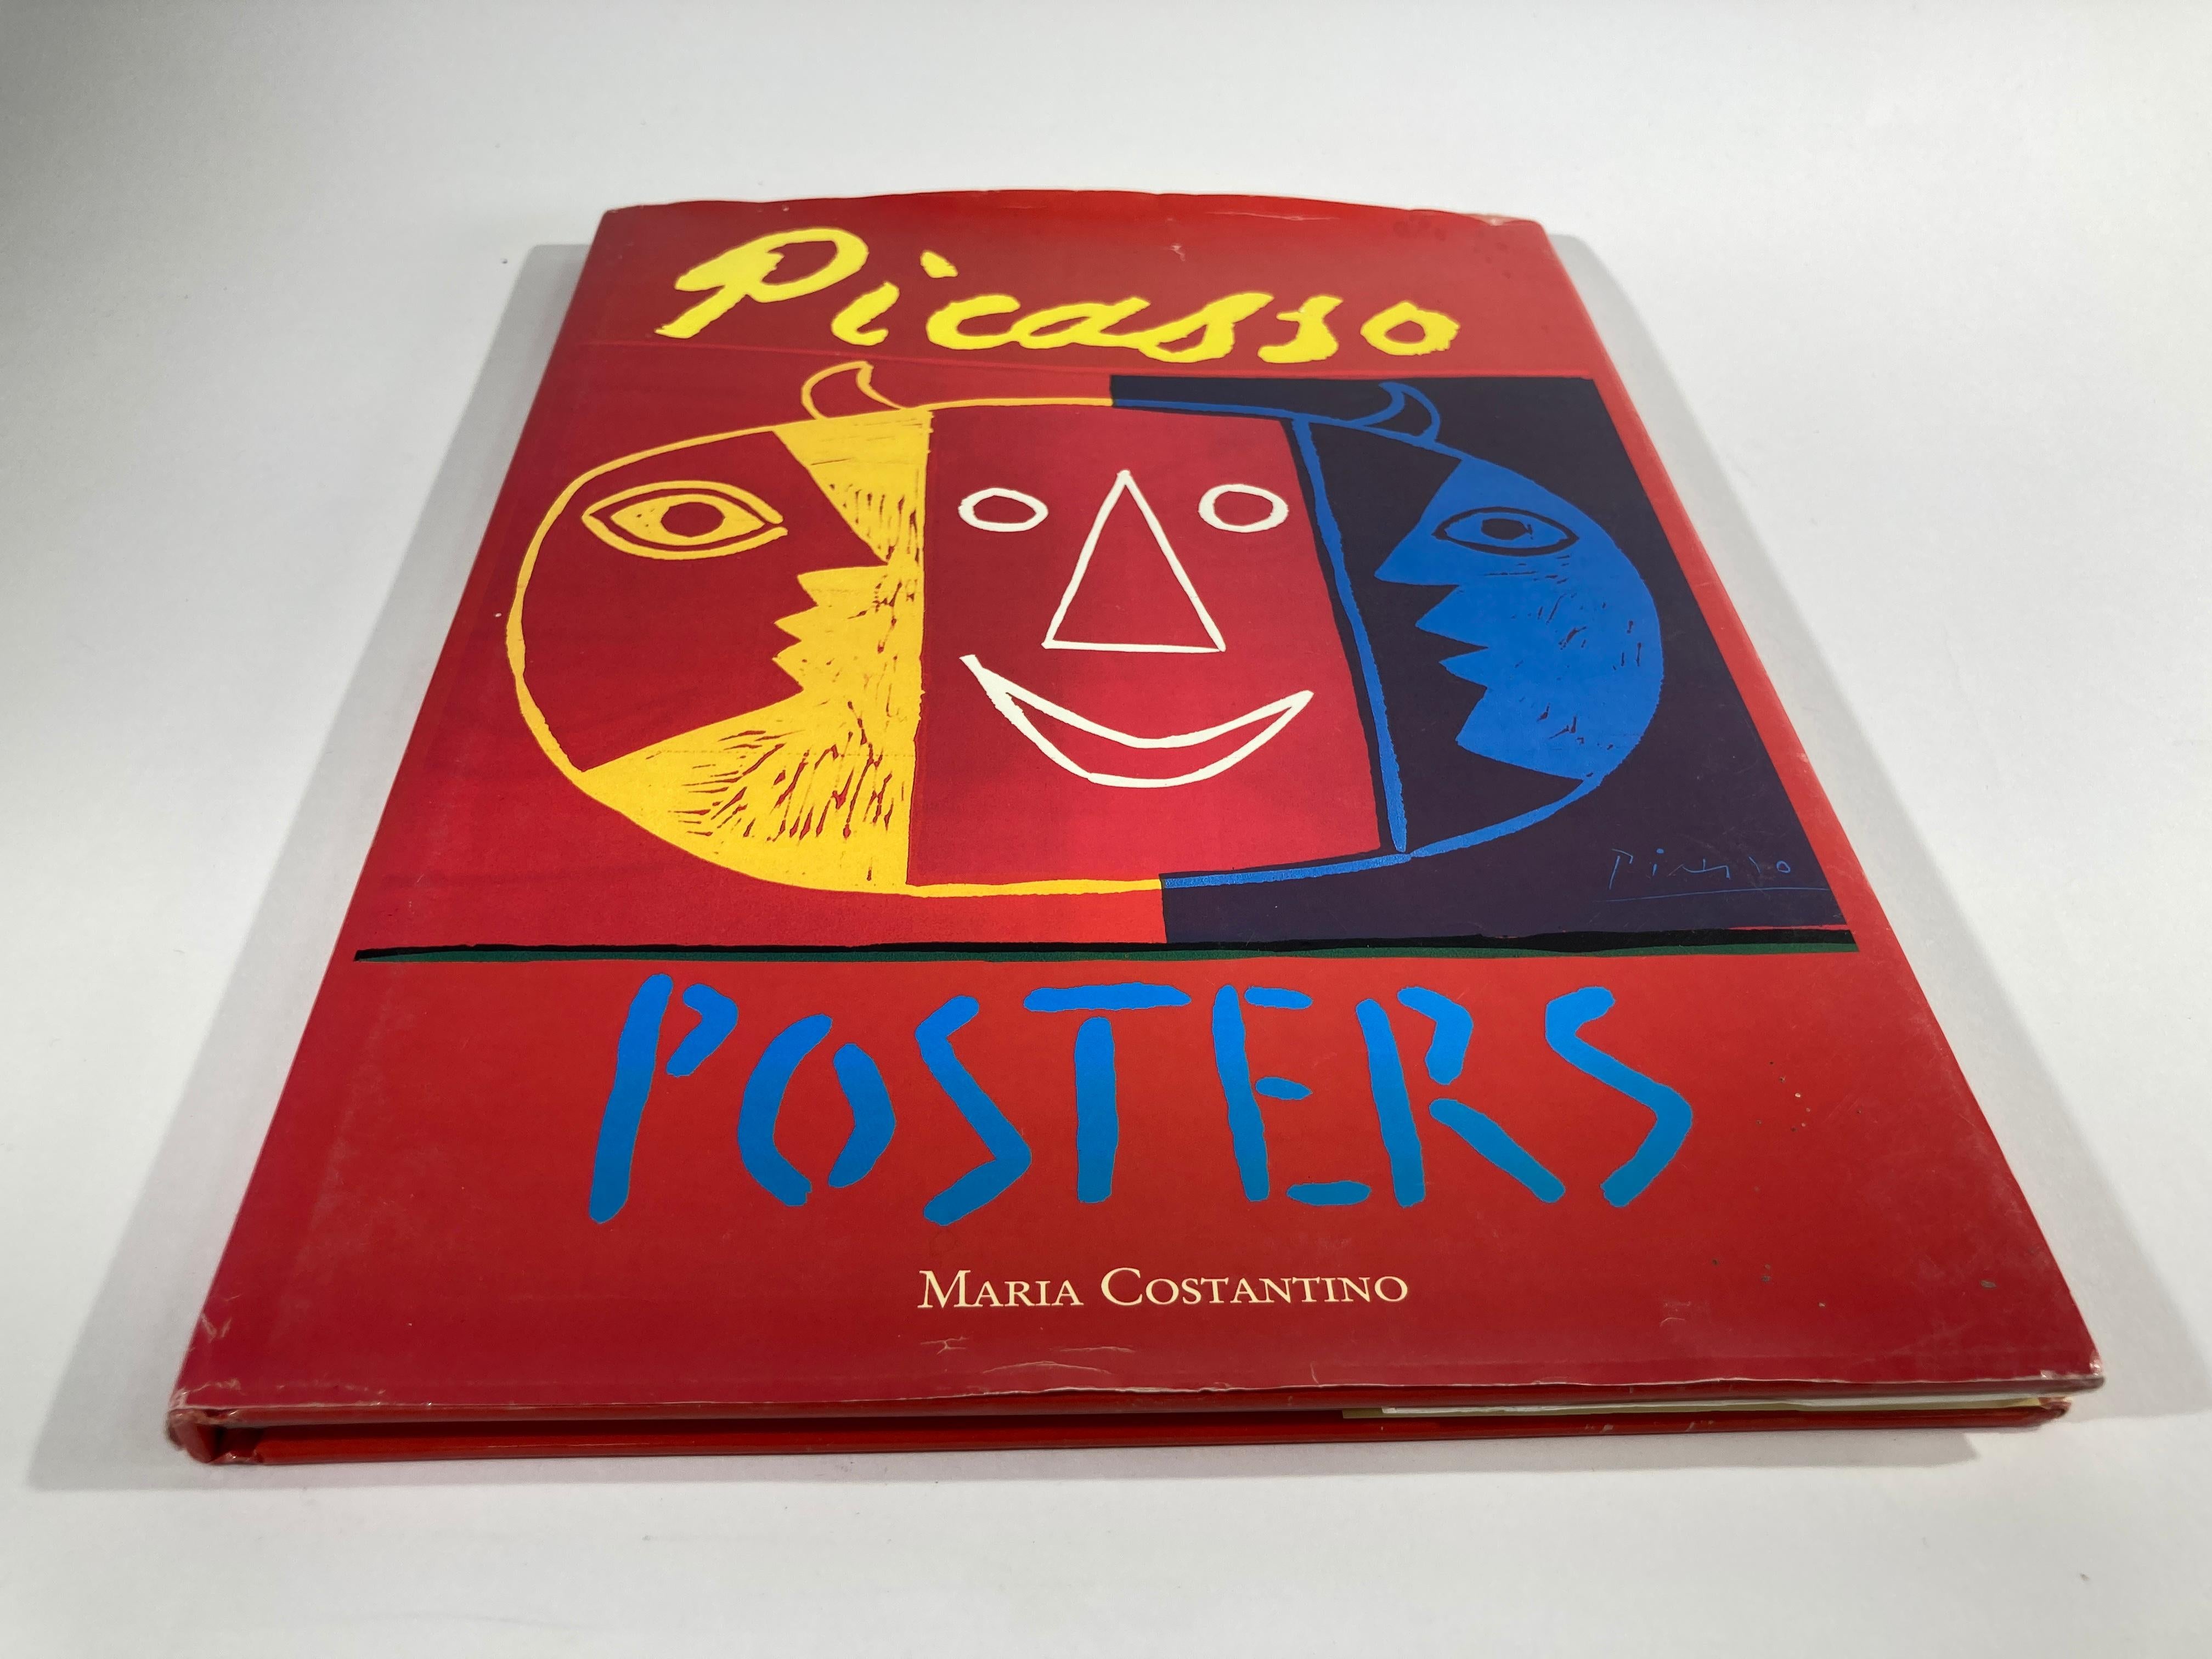 'Picasso Posters' Cubism Red Pablo Picasso Art Book by Maria Costantino.
Pablo Picasso (1881-1973), The pre-eminent artist of the 20th century; huge folio with 295 black-and-white and color plates, 51 of the color plates tipped in; Catalogue